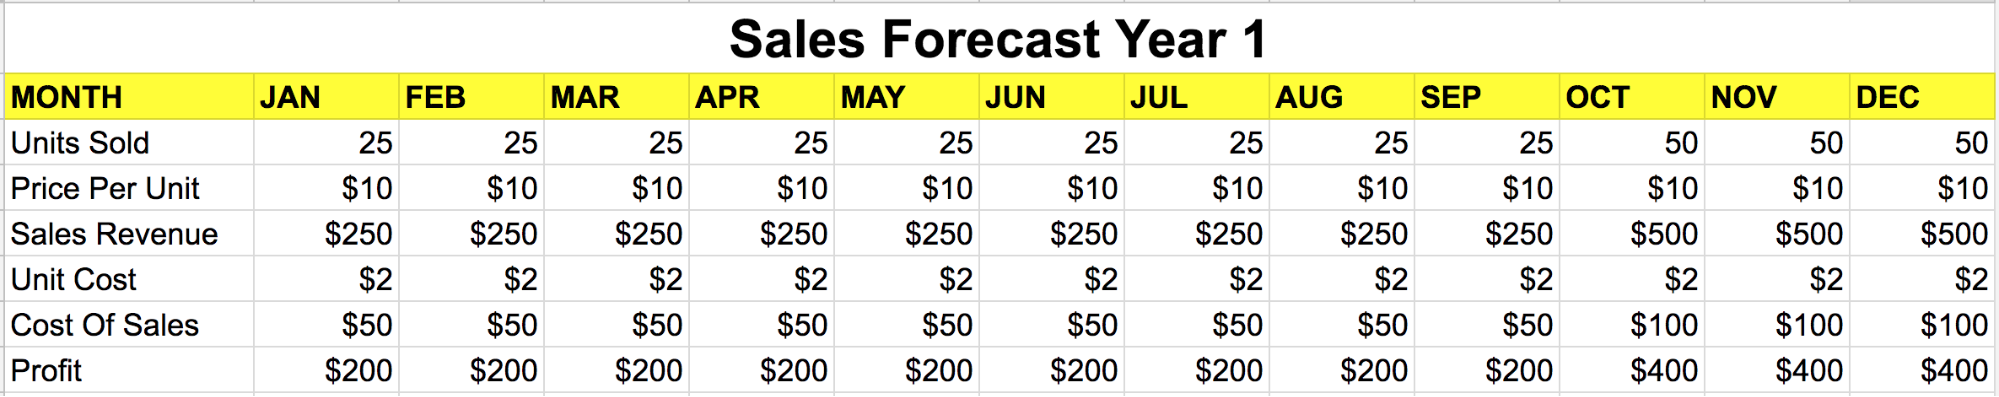 Spreadsheet showing the sales forecast for a product for the 1st year